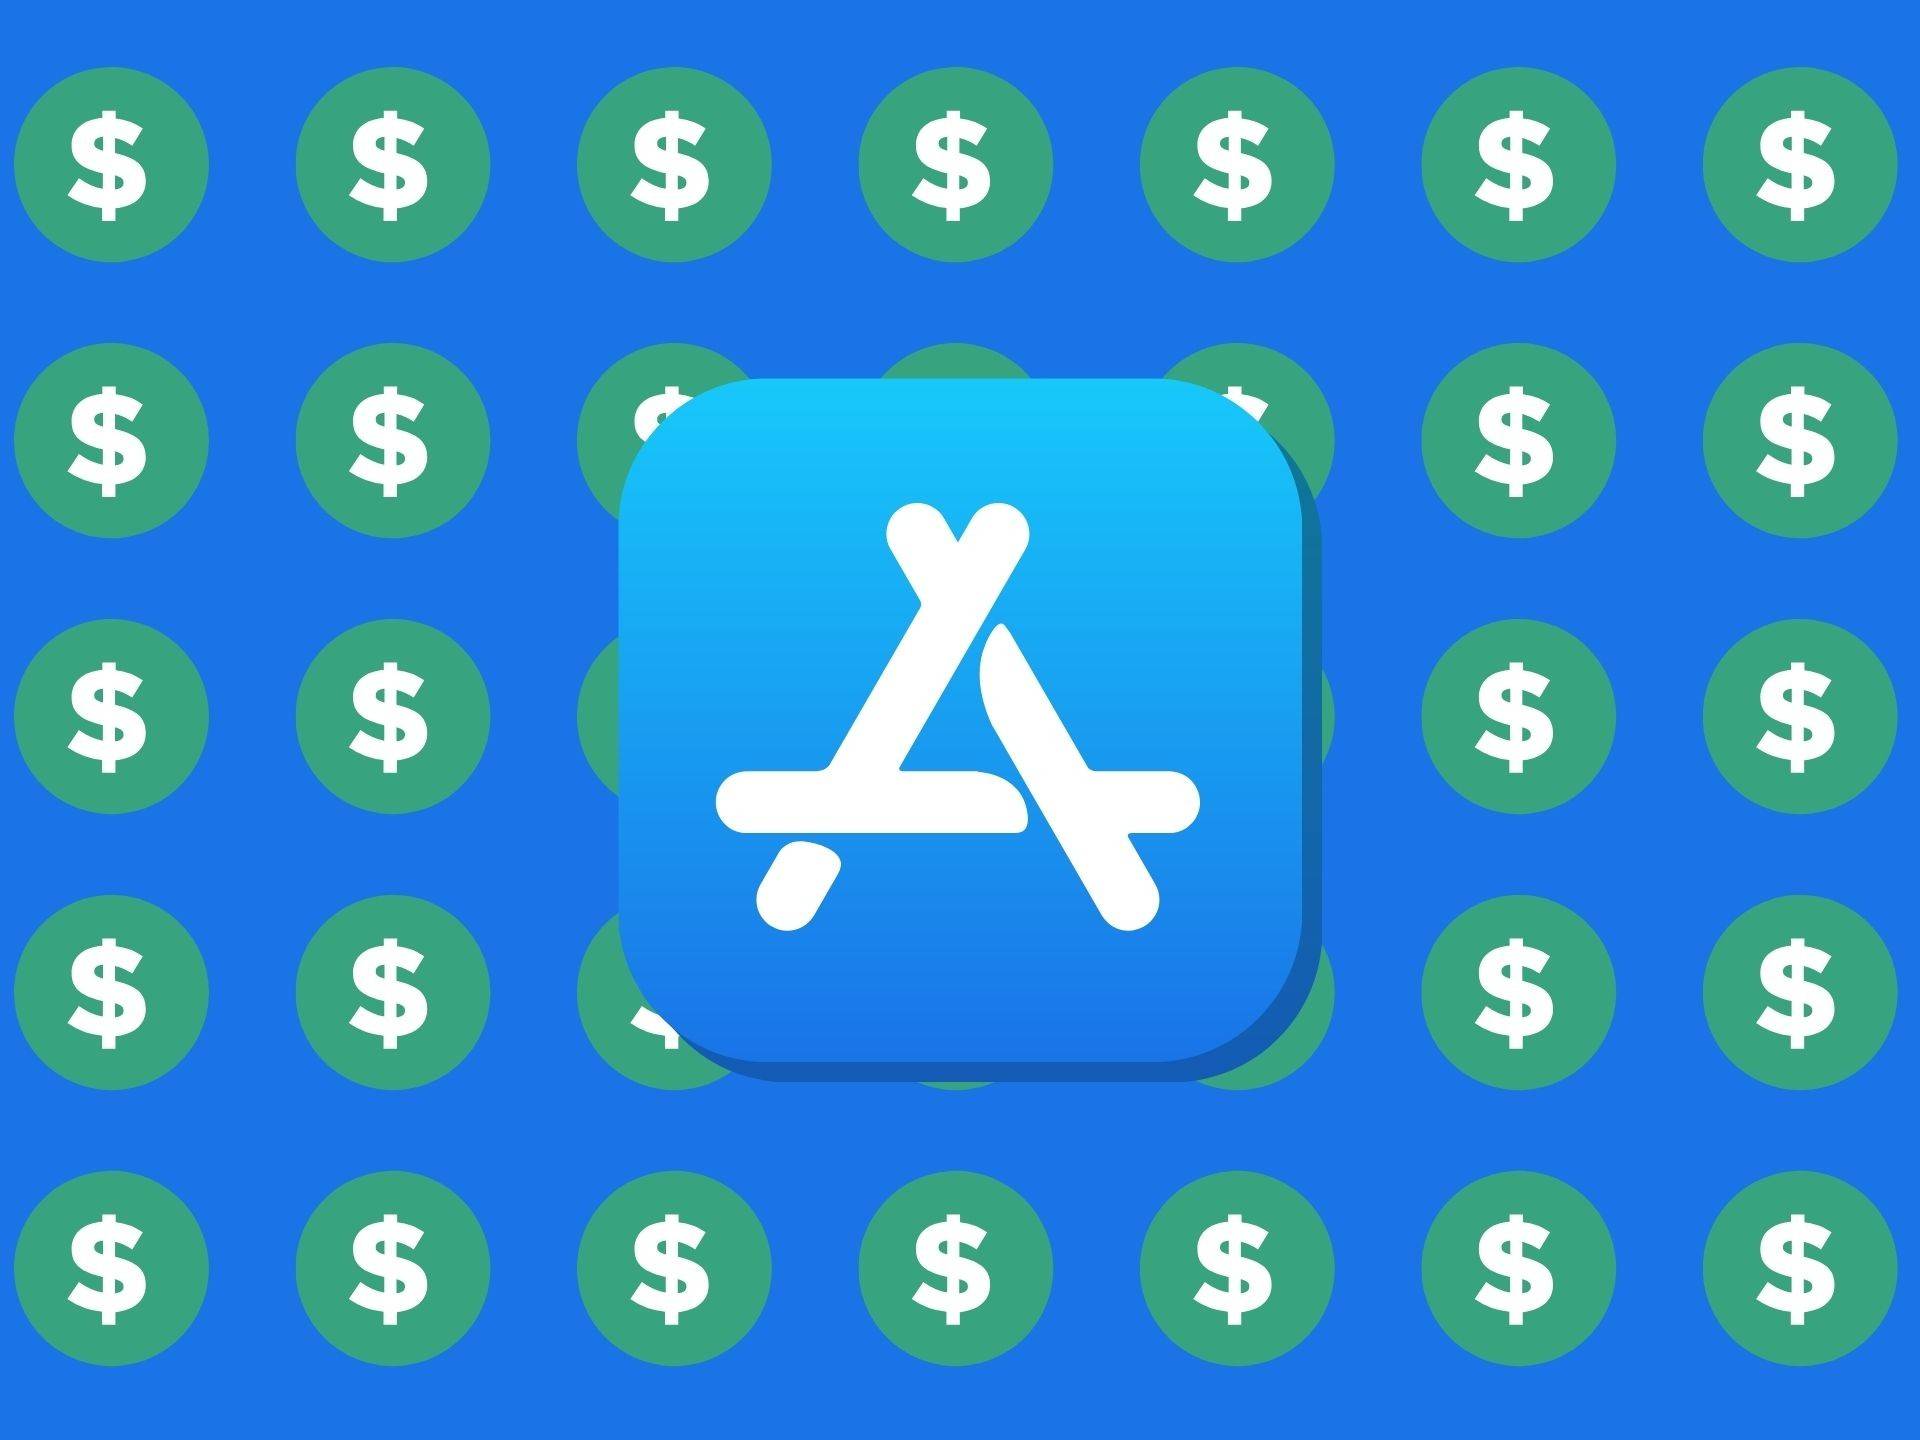 Apple App Store logo with Dollar signs in the background